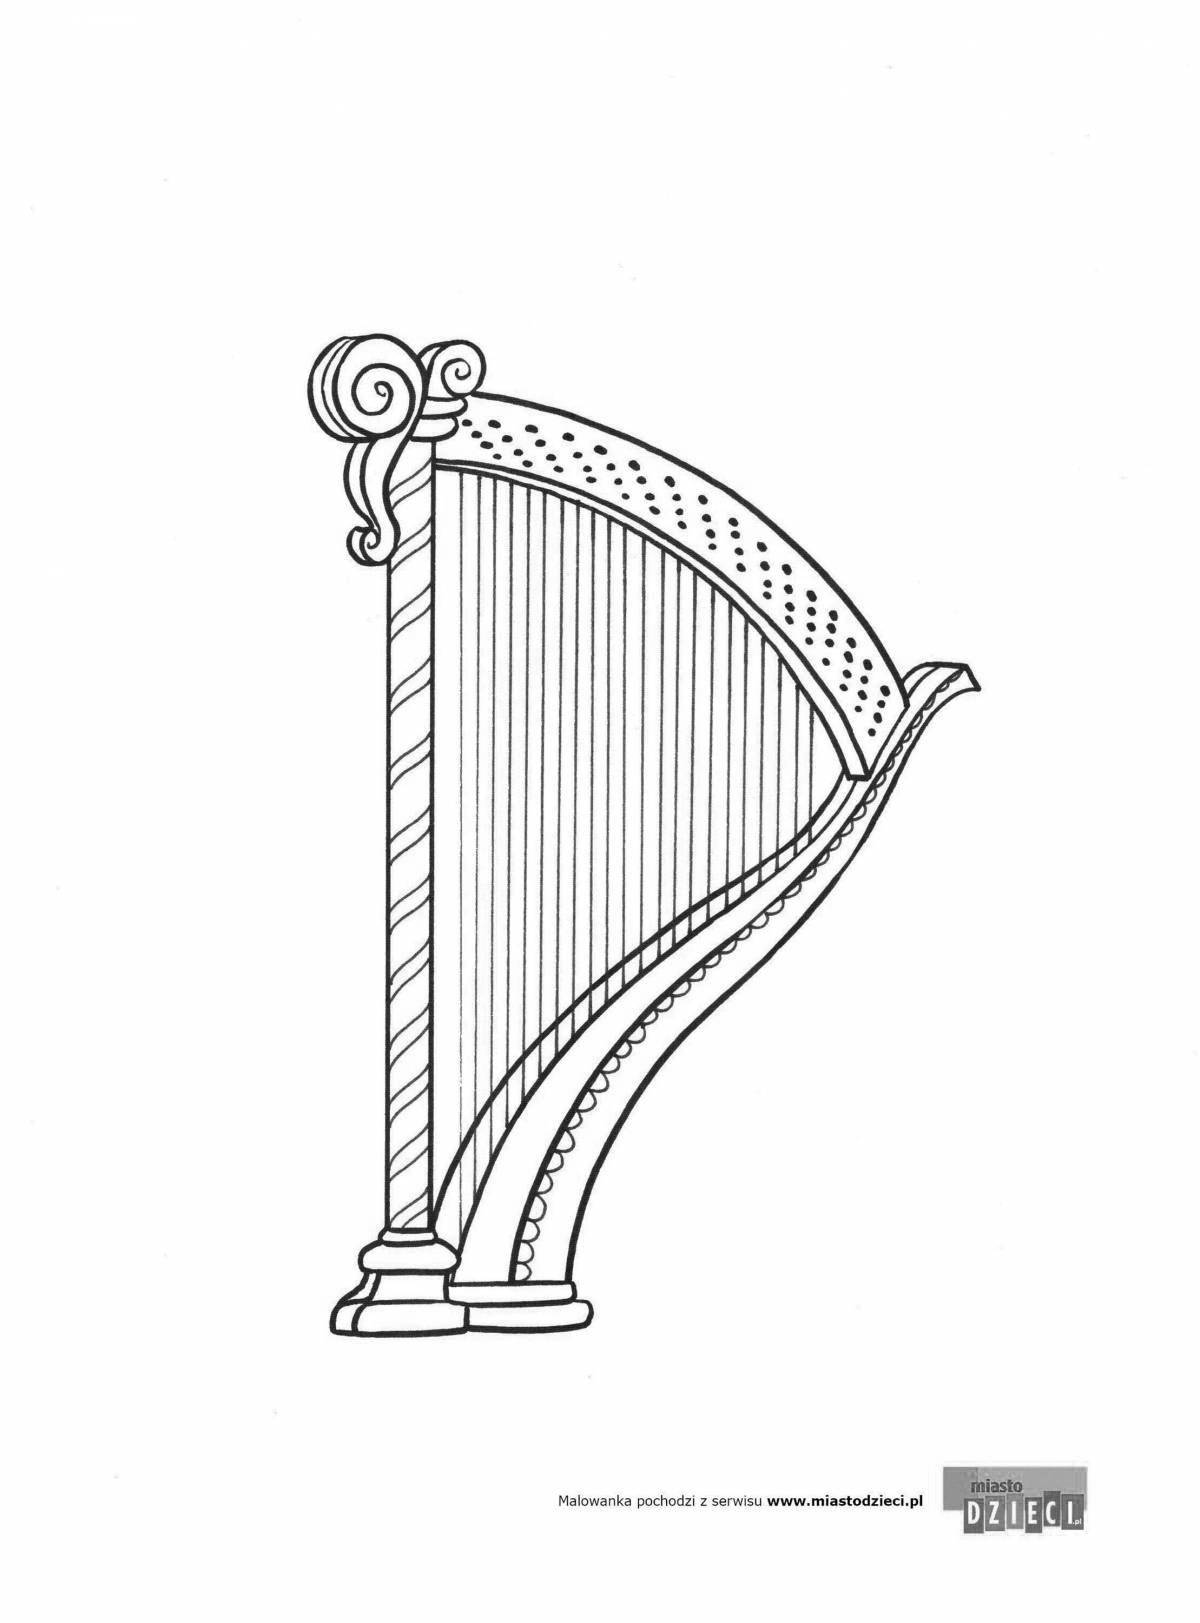 Awesome harp coloring page for kids